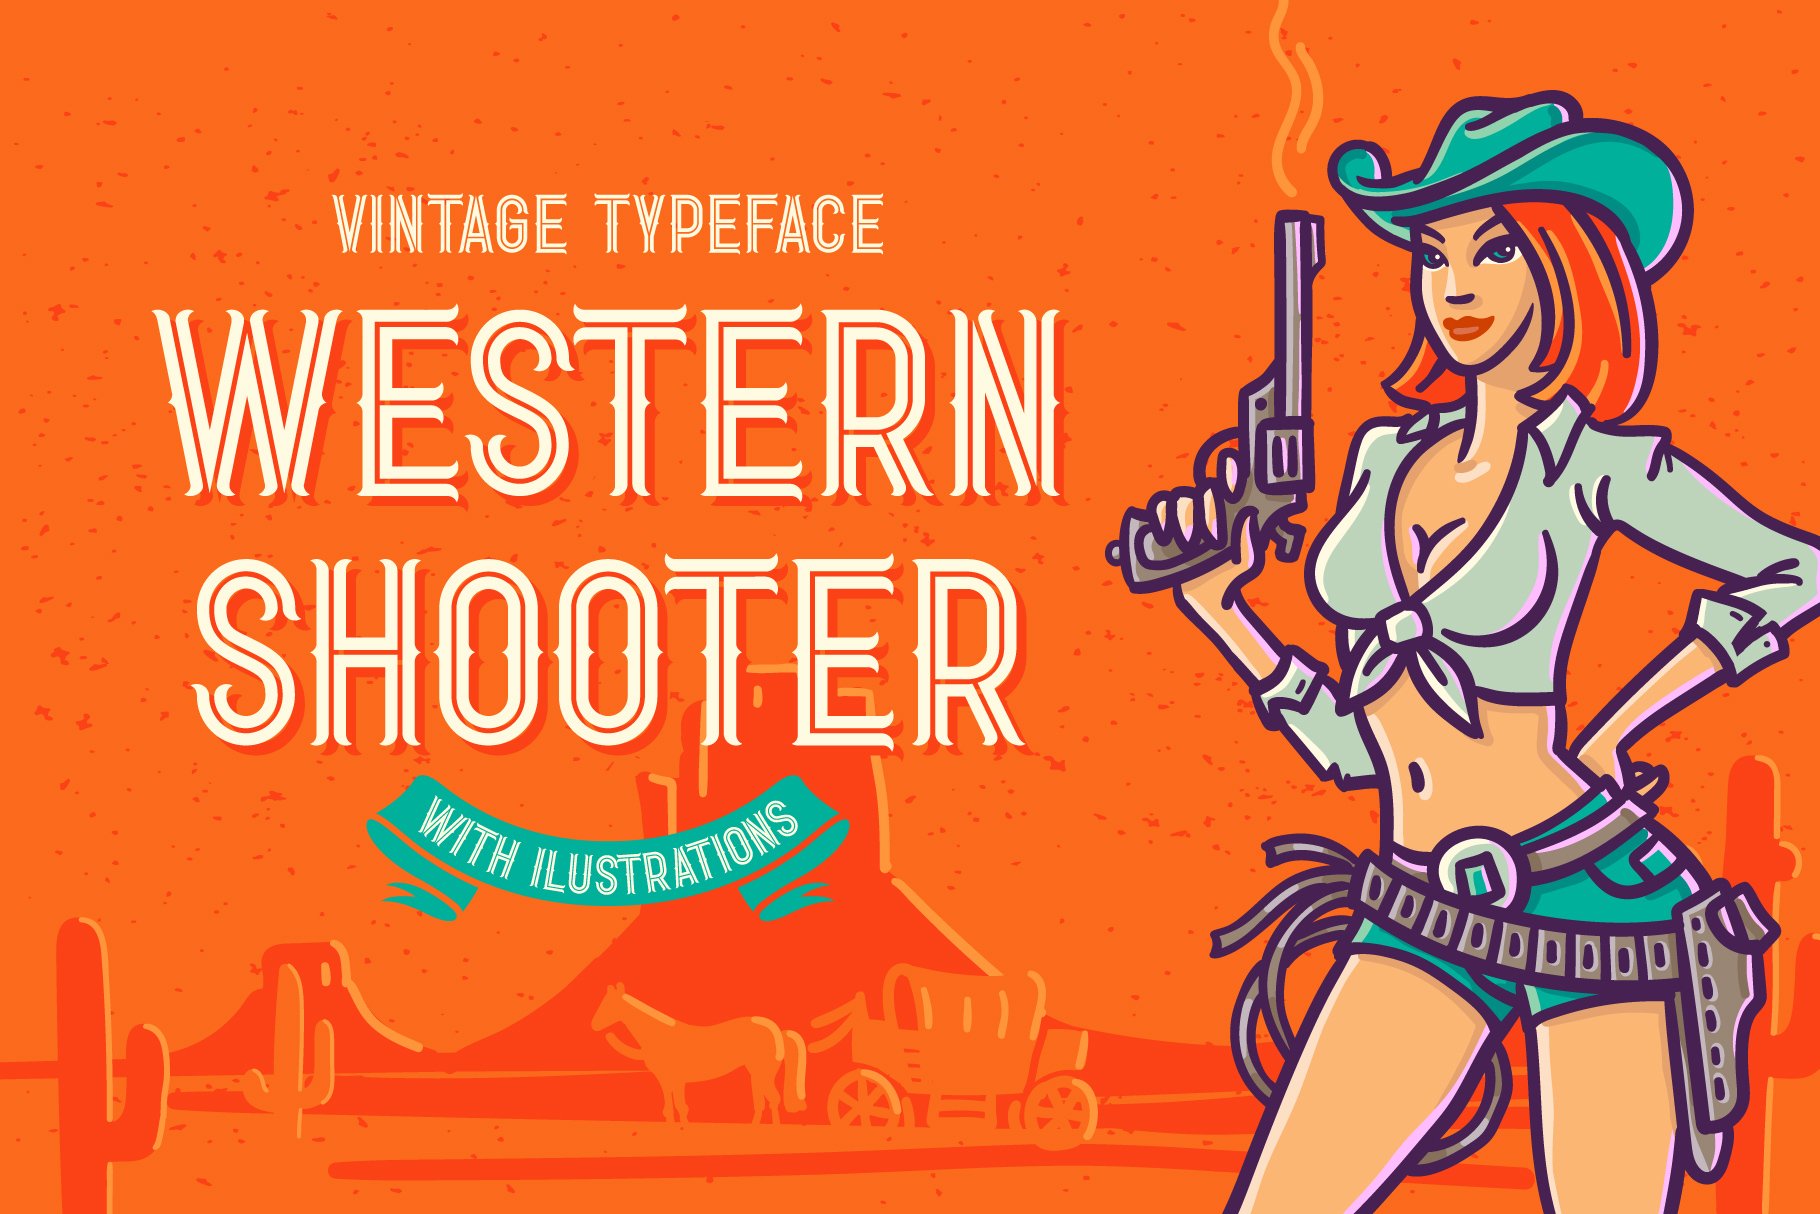 Western Shooter font with bonus cover image.